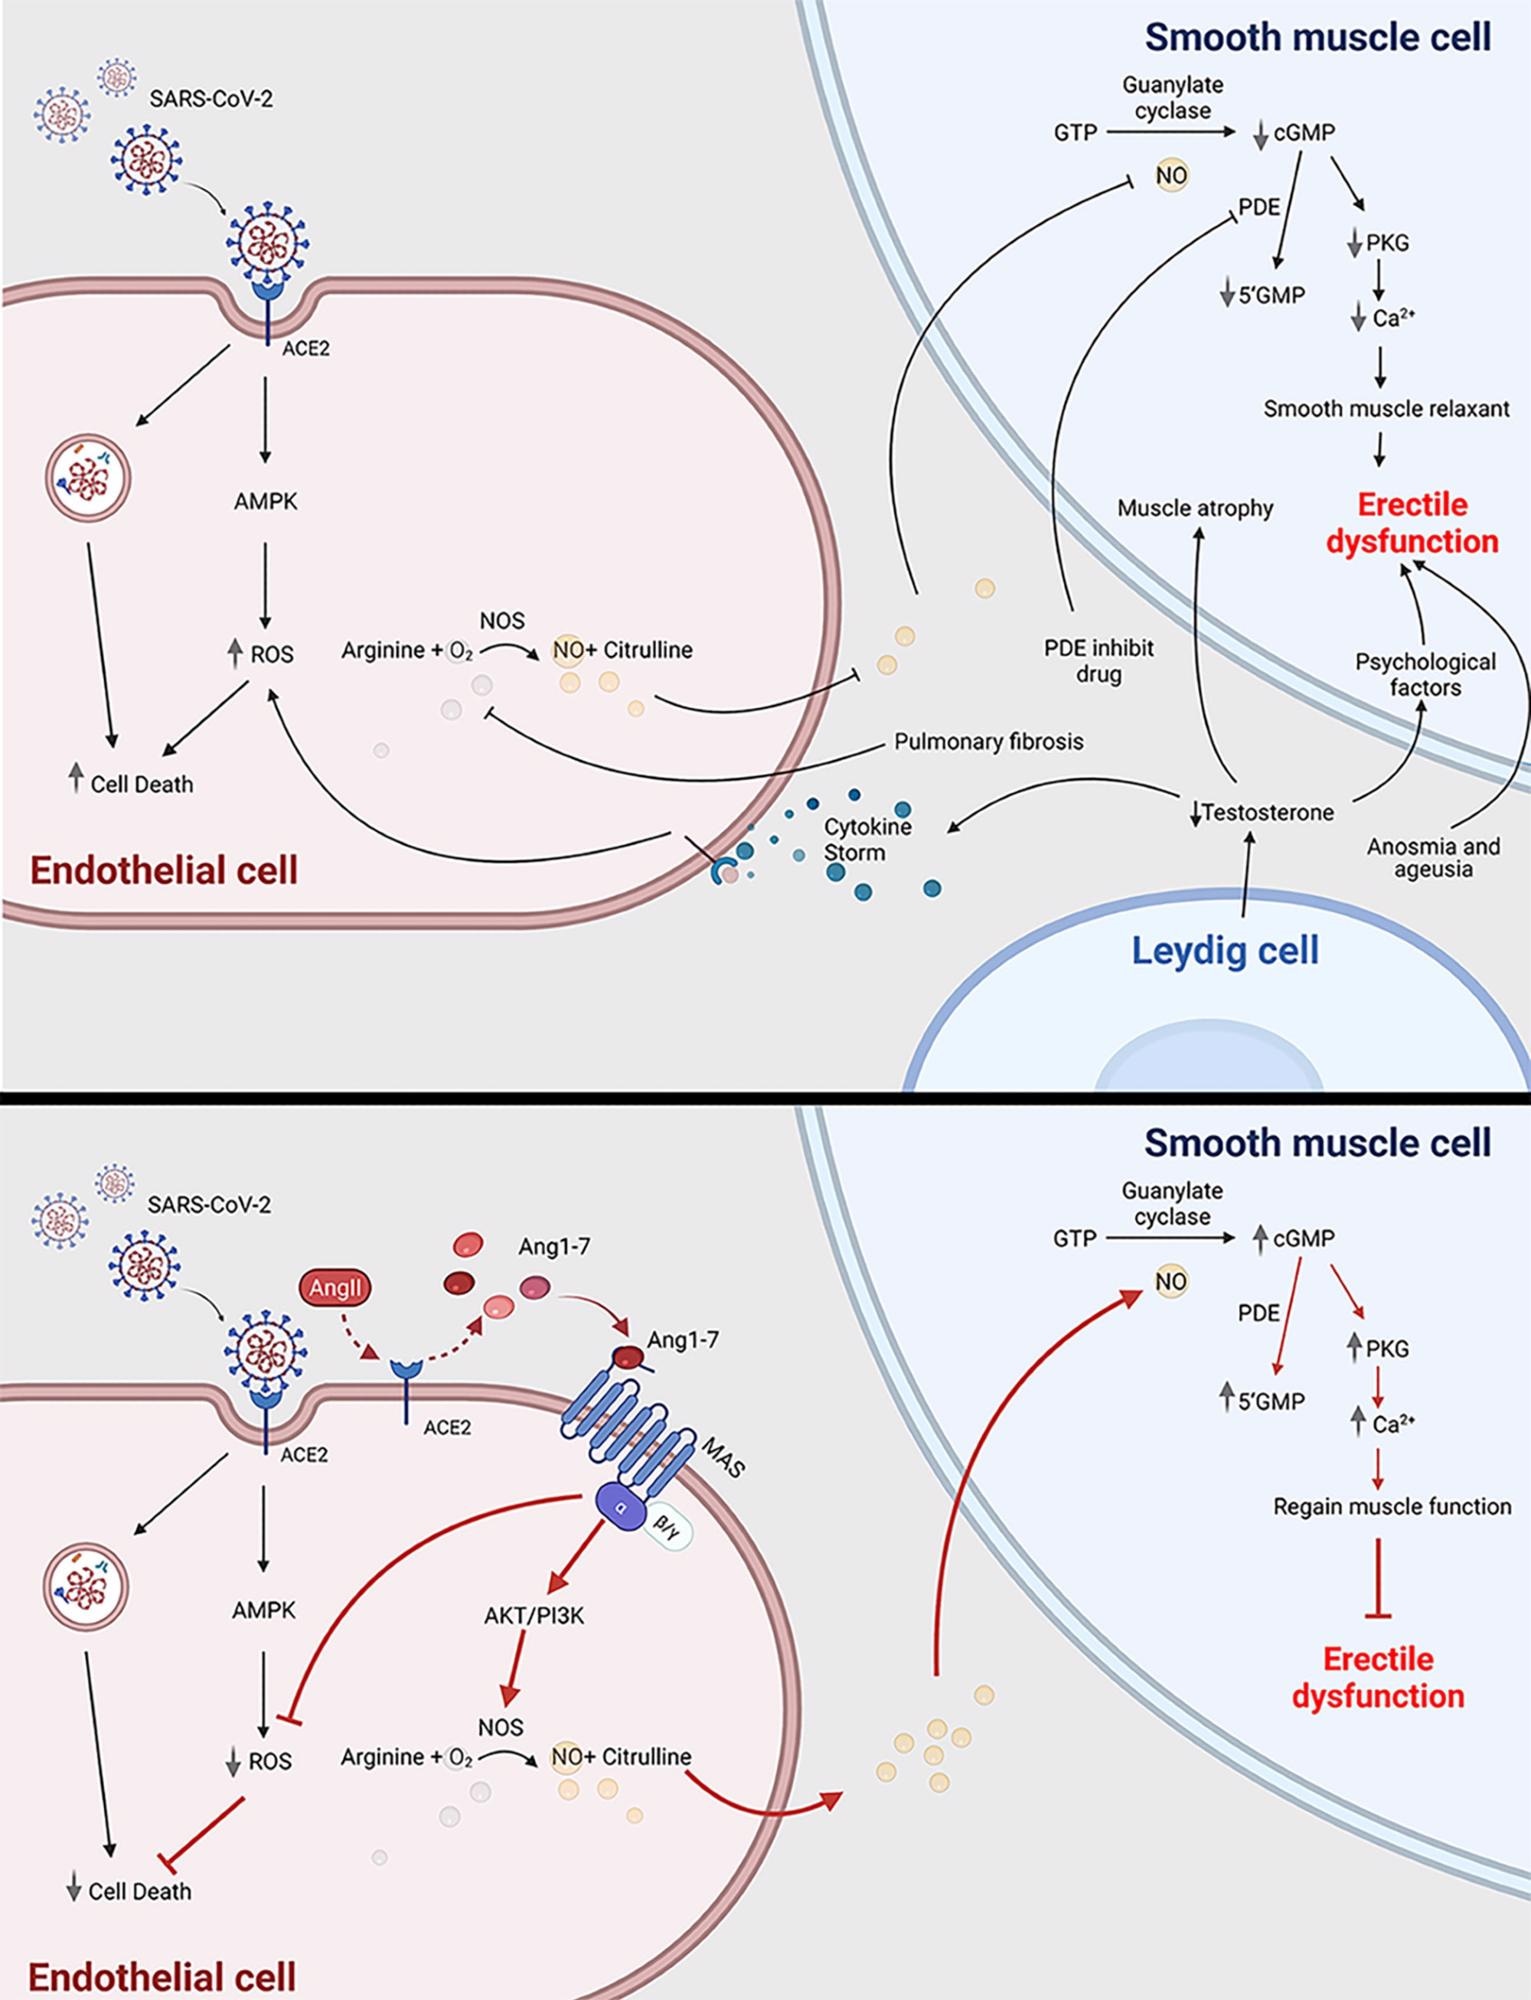 COVID-19 can cause erectile dysfunction. The potential mechanism of how COVID-19 infection is related to erectile dysfunction through impairing endothelial cell and smooth muscle cell (top panel); Ang1-7 is a potential novel drug target to treat erectile dysfunction in COVID-19 patients (bottom panel). ACE2, angiotensin-converting enzyme 2; SARS-CoV-2, severe acute respiratory syndrome coronavirus 2; ED, erectile dysfunction; ROS, reactive oxygen species; AMPK, AMP-activated protein kinase; Ang1-7, angiotensin 1-7; Ang II, angiotensin 2; PDE, phosphodiesterase; 5’GMP, Guanosine-5’-monophosphate; cGMP, cyclic guanosine monophosphate; PKG, Cyclic GMP–dependent protein kinase; NOS, nitric oxide synthase. This scheme was created using BioRender, accessed on Sept. 29, 2021.